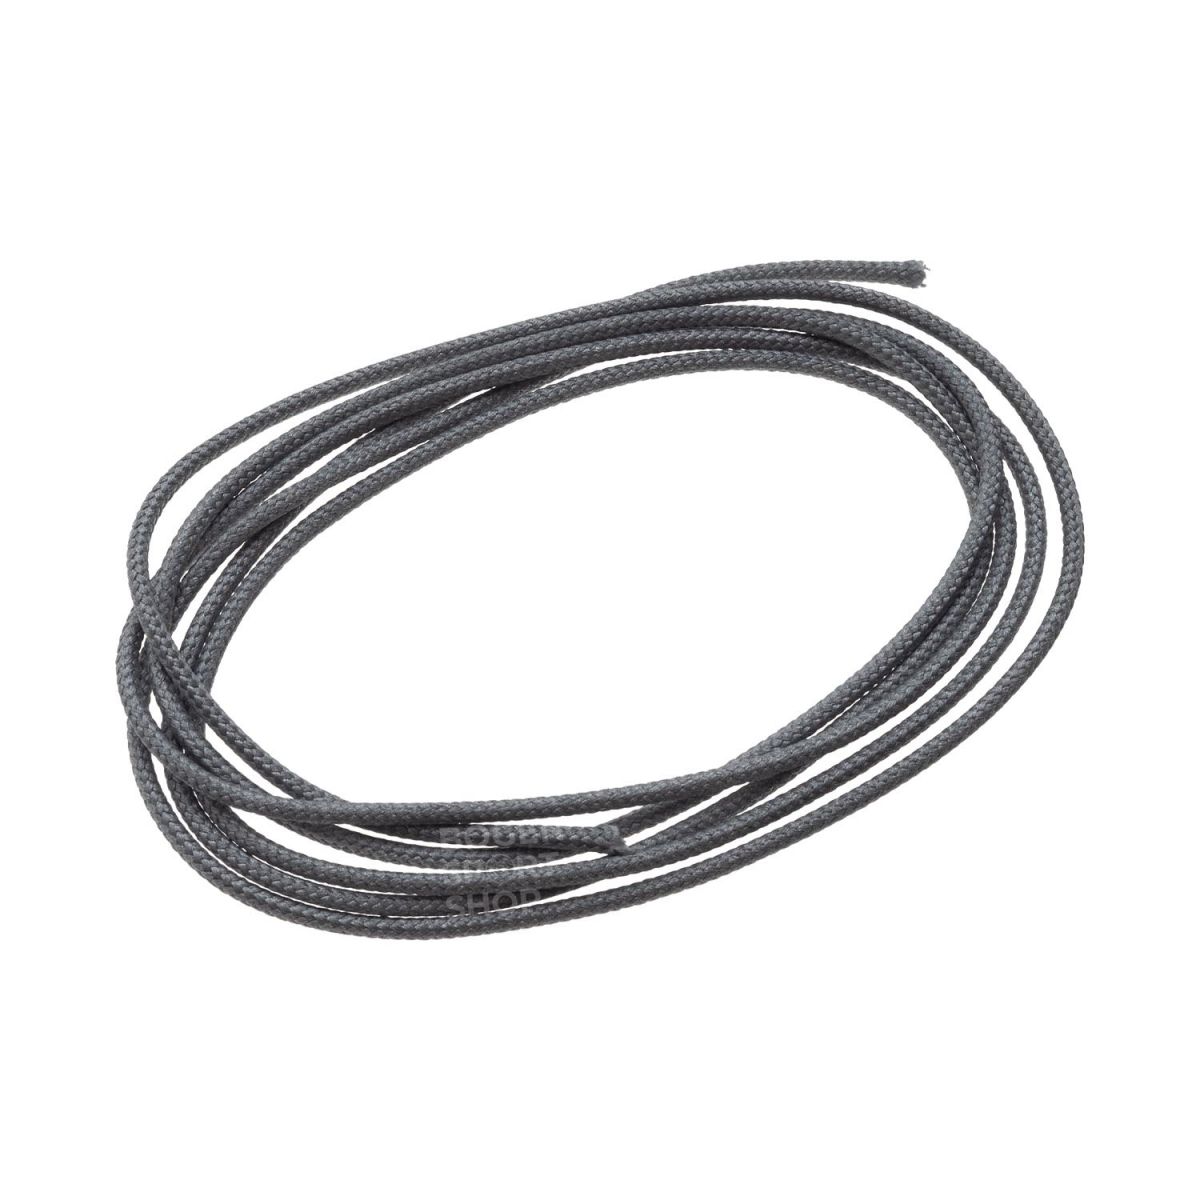 BCY D-Loop Rope .060" / 1.6 mm Braided Polyester Black or Silver - 1 m